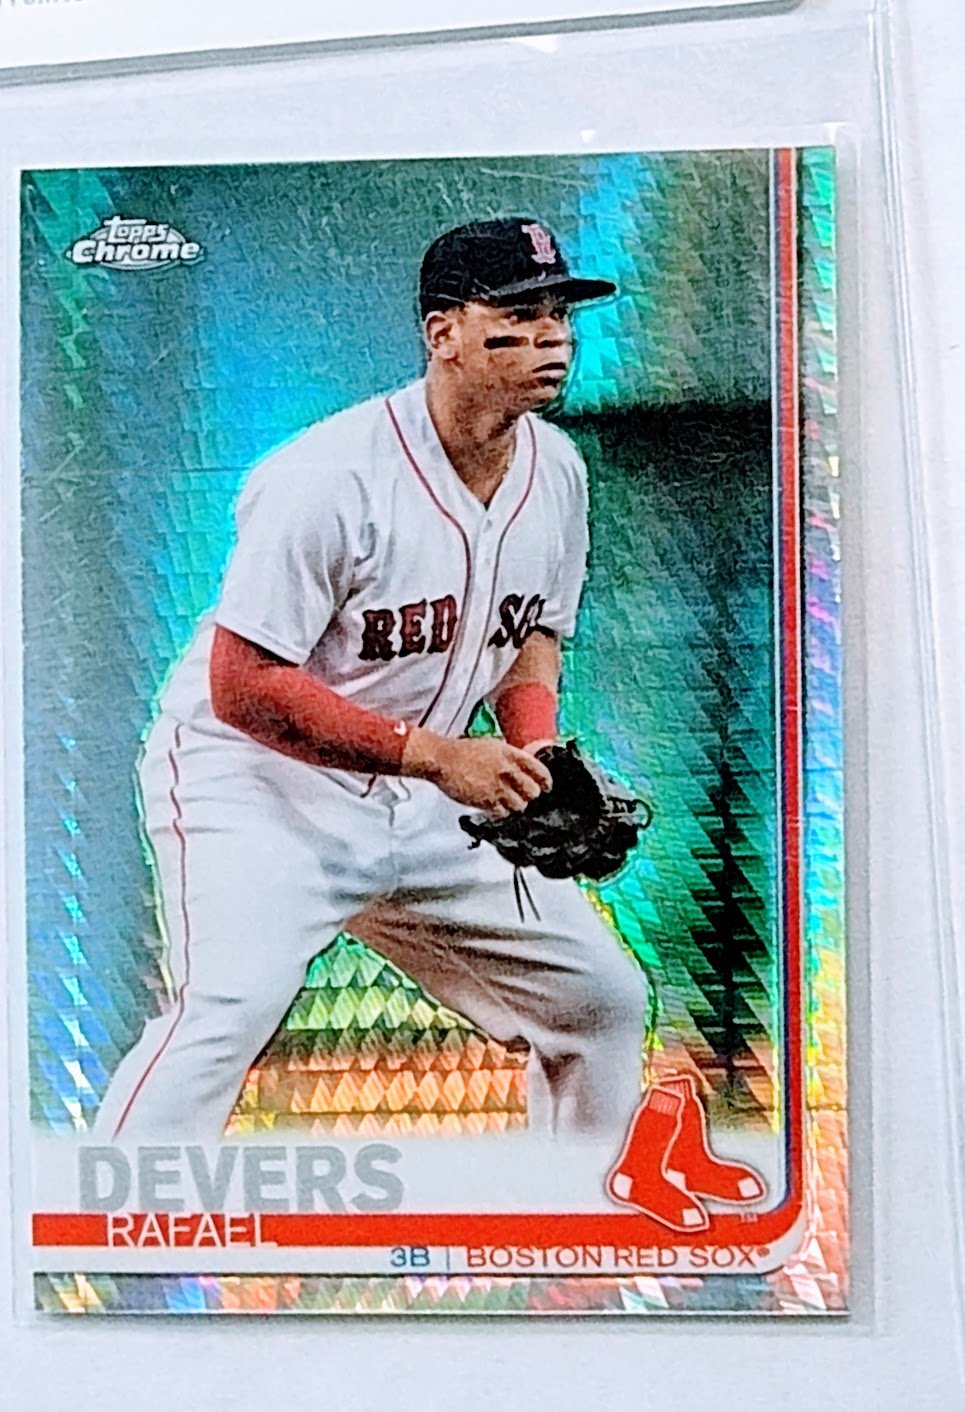 2019 Topps Chrome Rafael Devers Prism Refractor Baseball Trading Card TPTV simple Xclusive Collectibles   